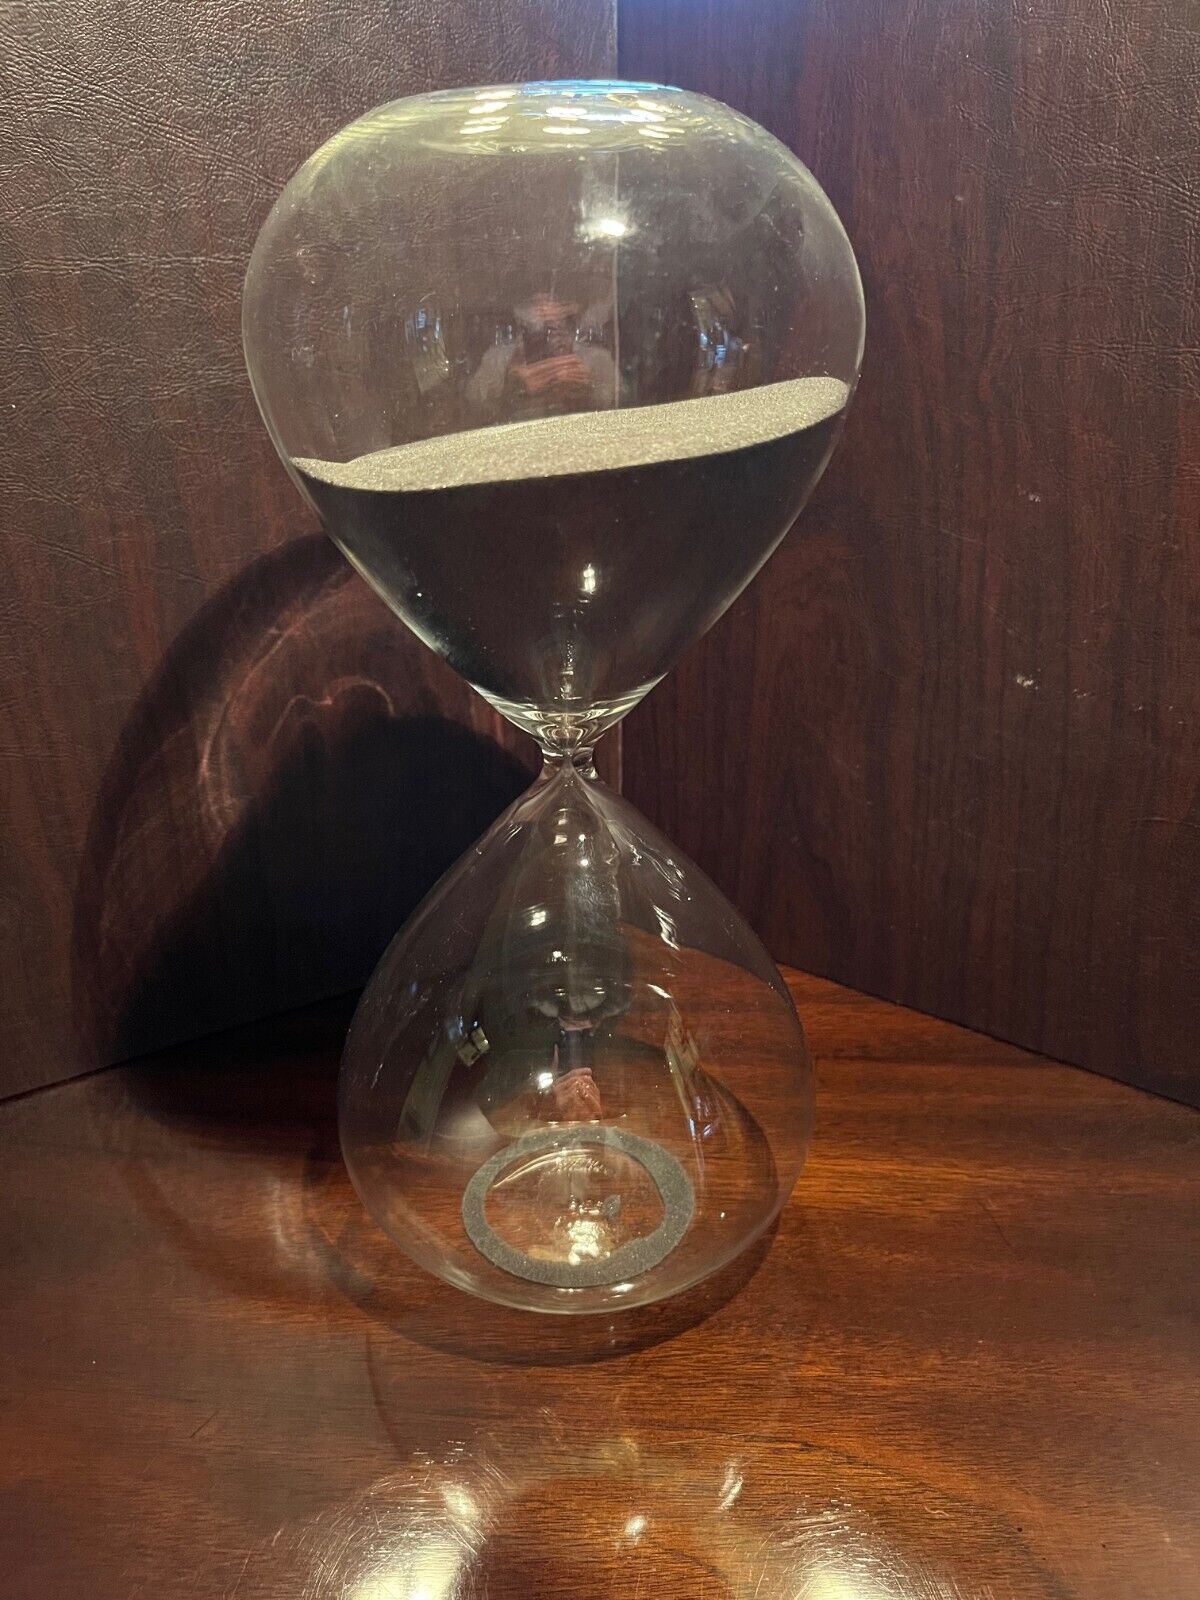 Glass hourglass with black sand. 12 inches tall, 1 hour 20 minute timer